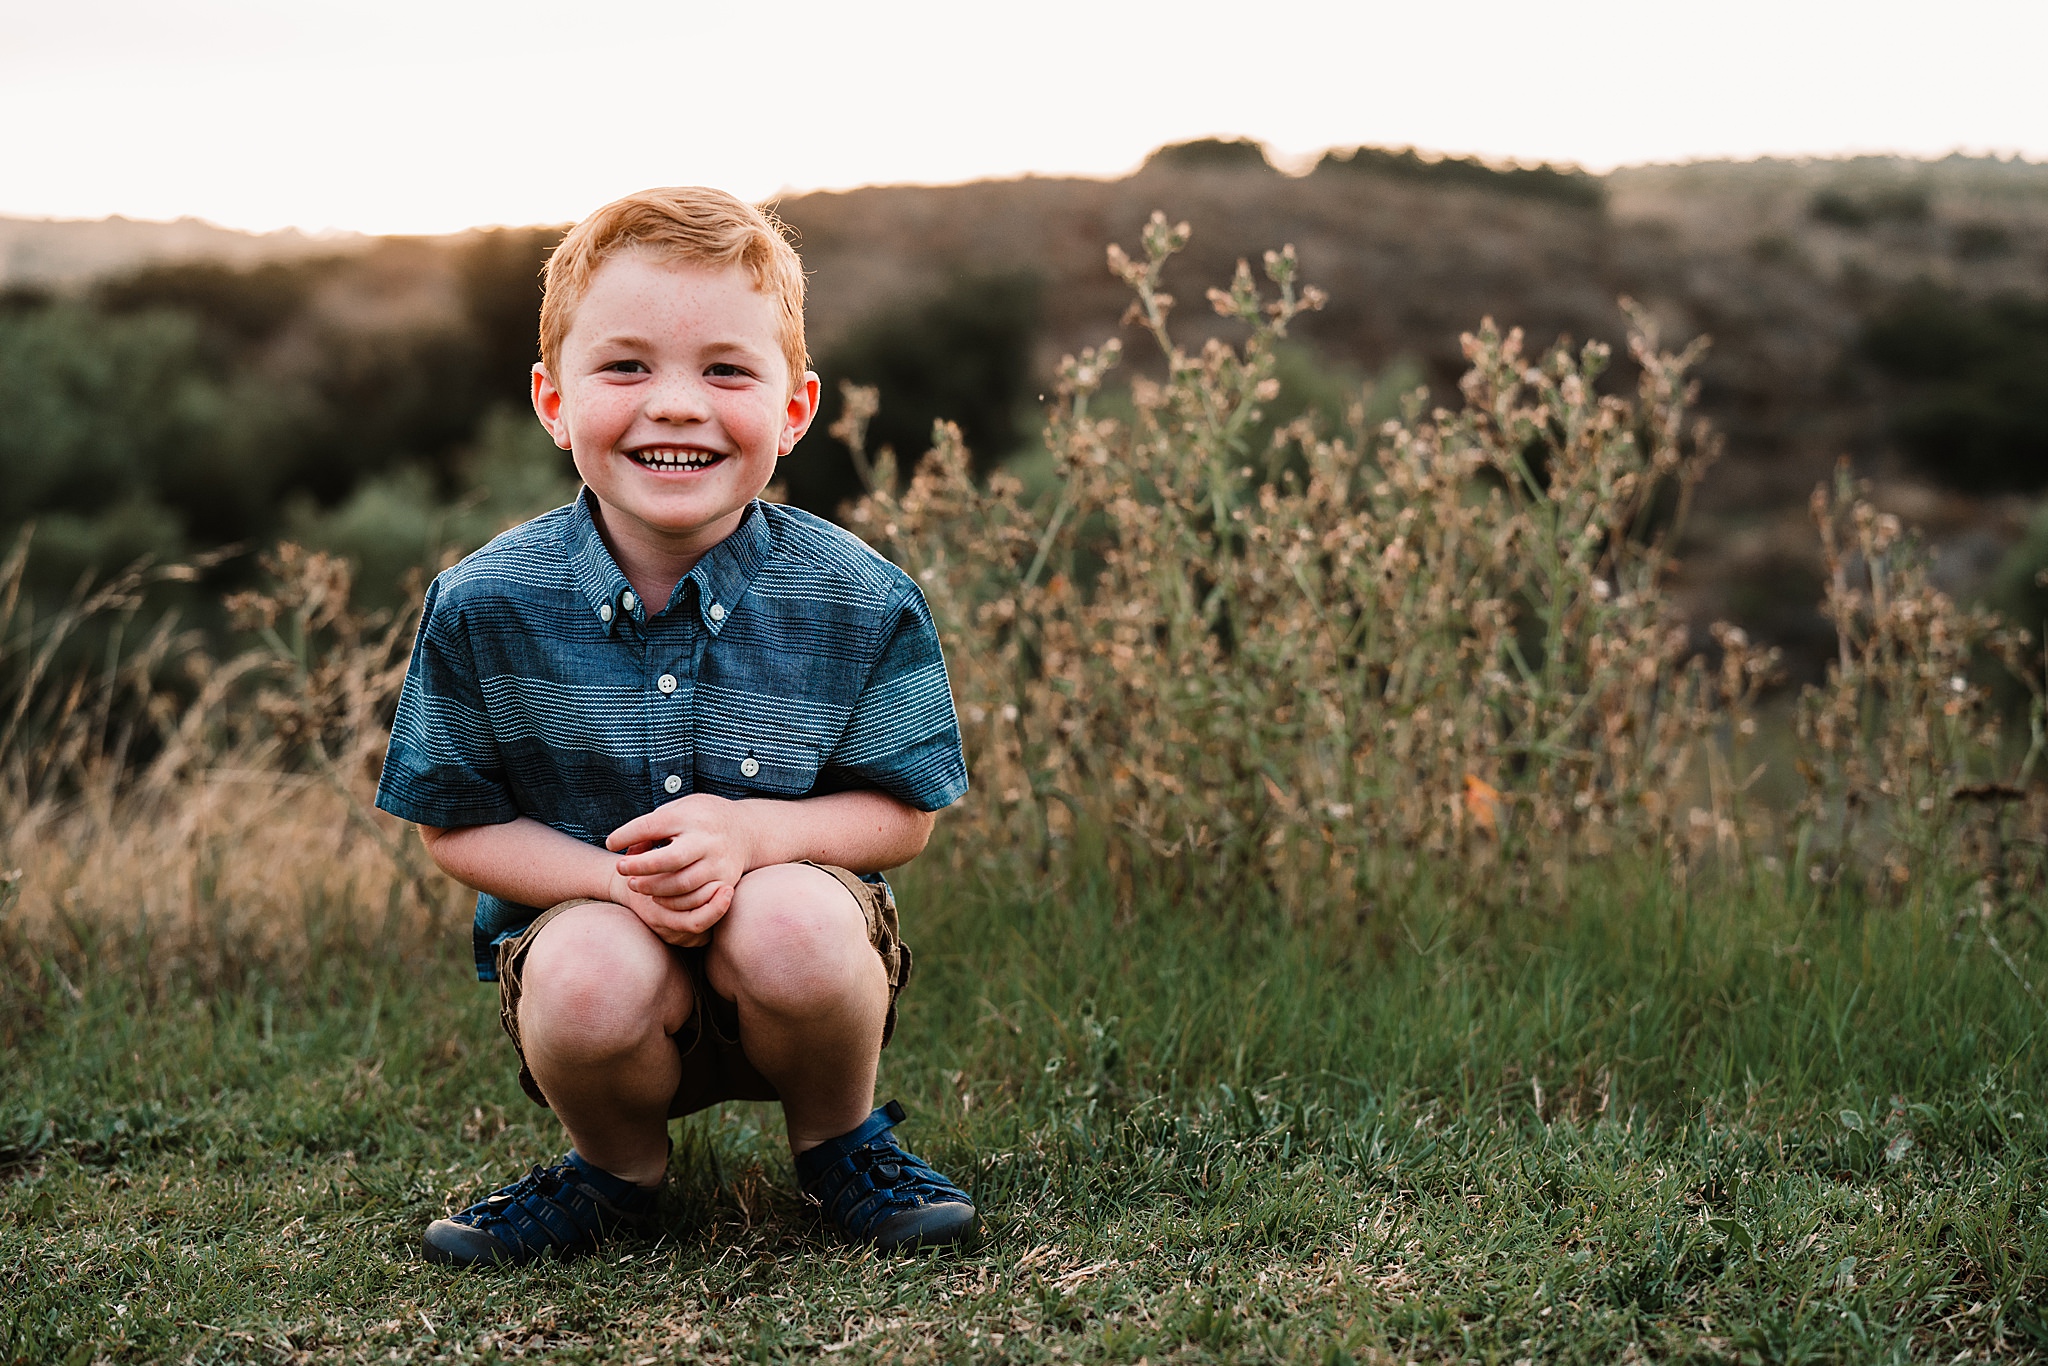 Family Photography in Oceanside, Family Photography in Carlsbad, Family Photography in North County San Diego, Family Photography in Vista, Family Photography in Fallbrook, Family Photography in San Marcos